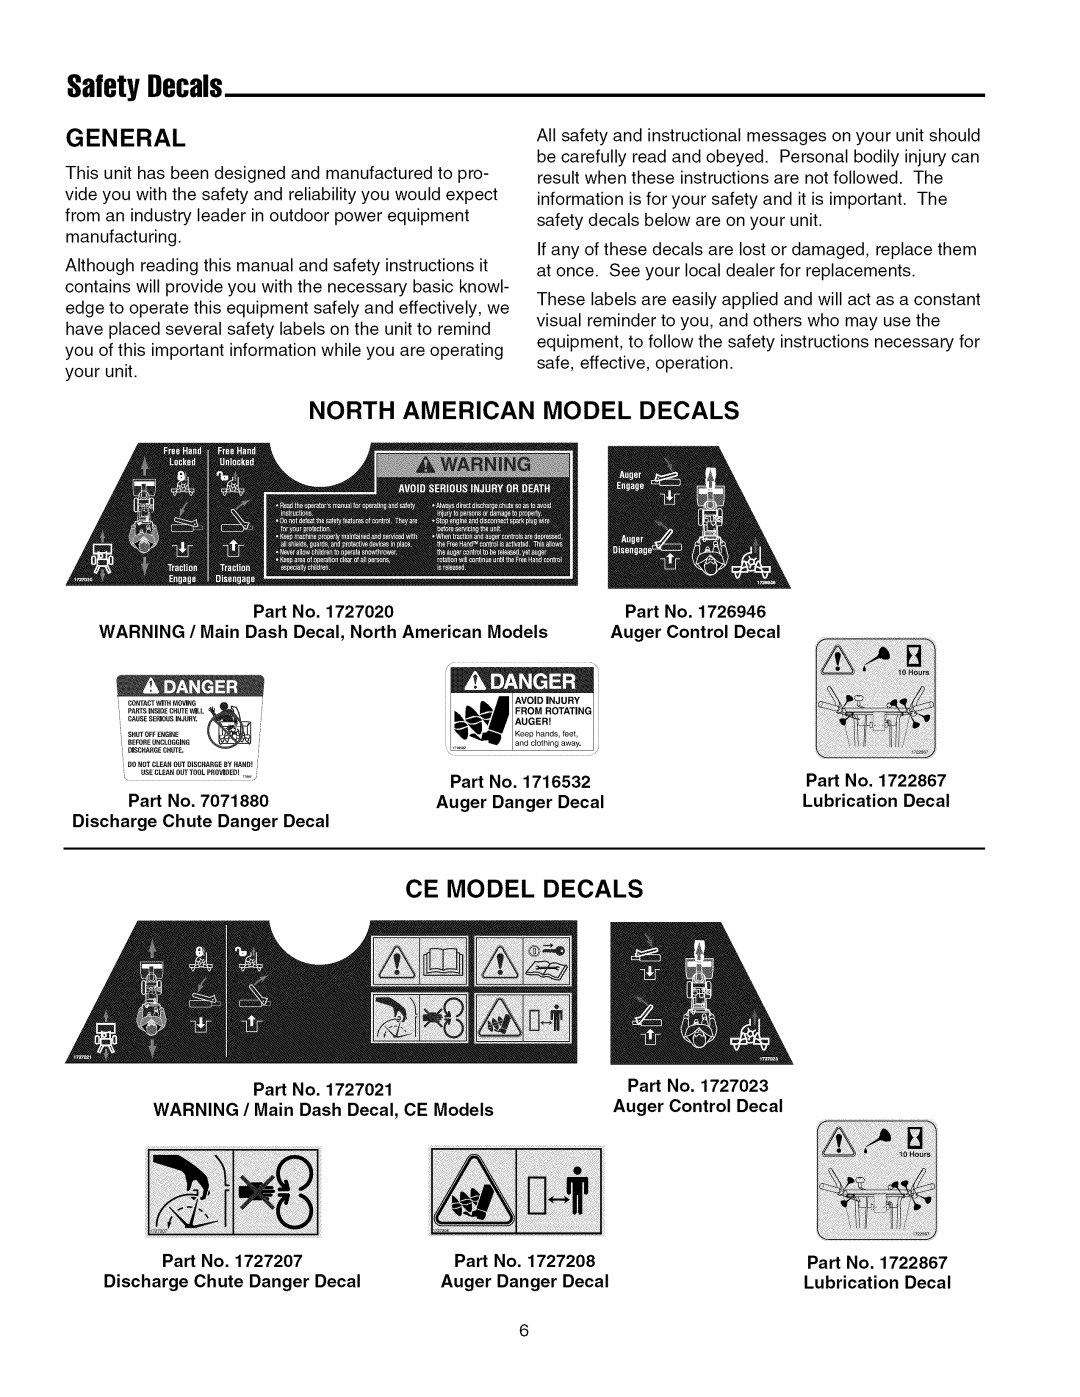 Snapper 8560, 7555 manual SafetyDecals, General, North American Model Decals, Ce Model Decals 